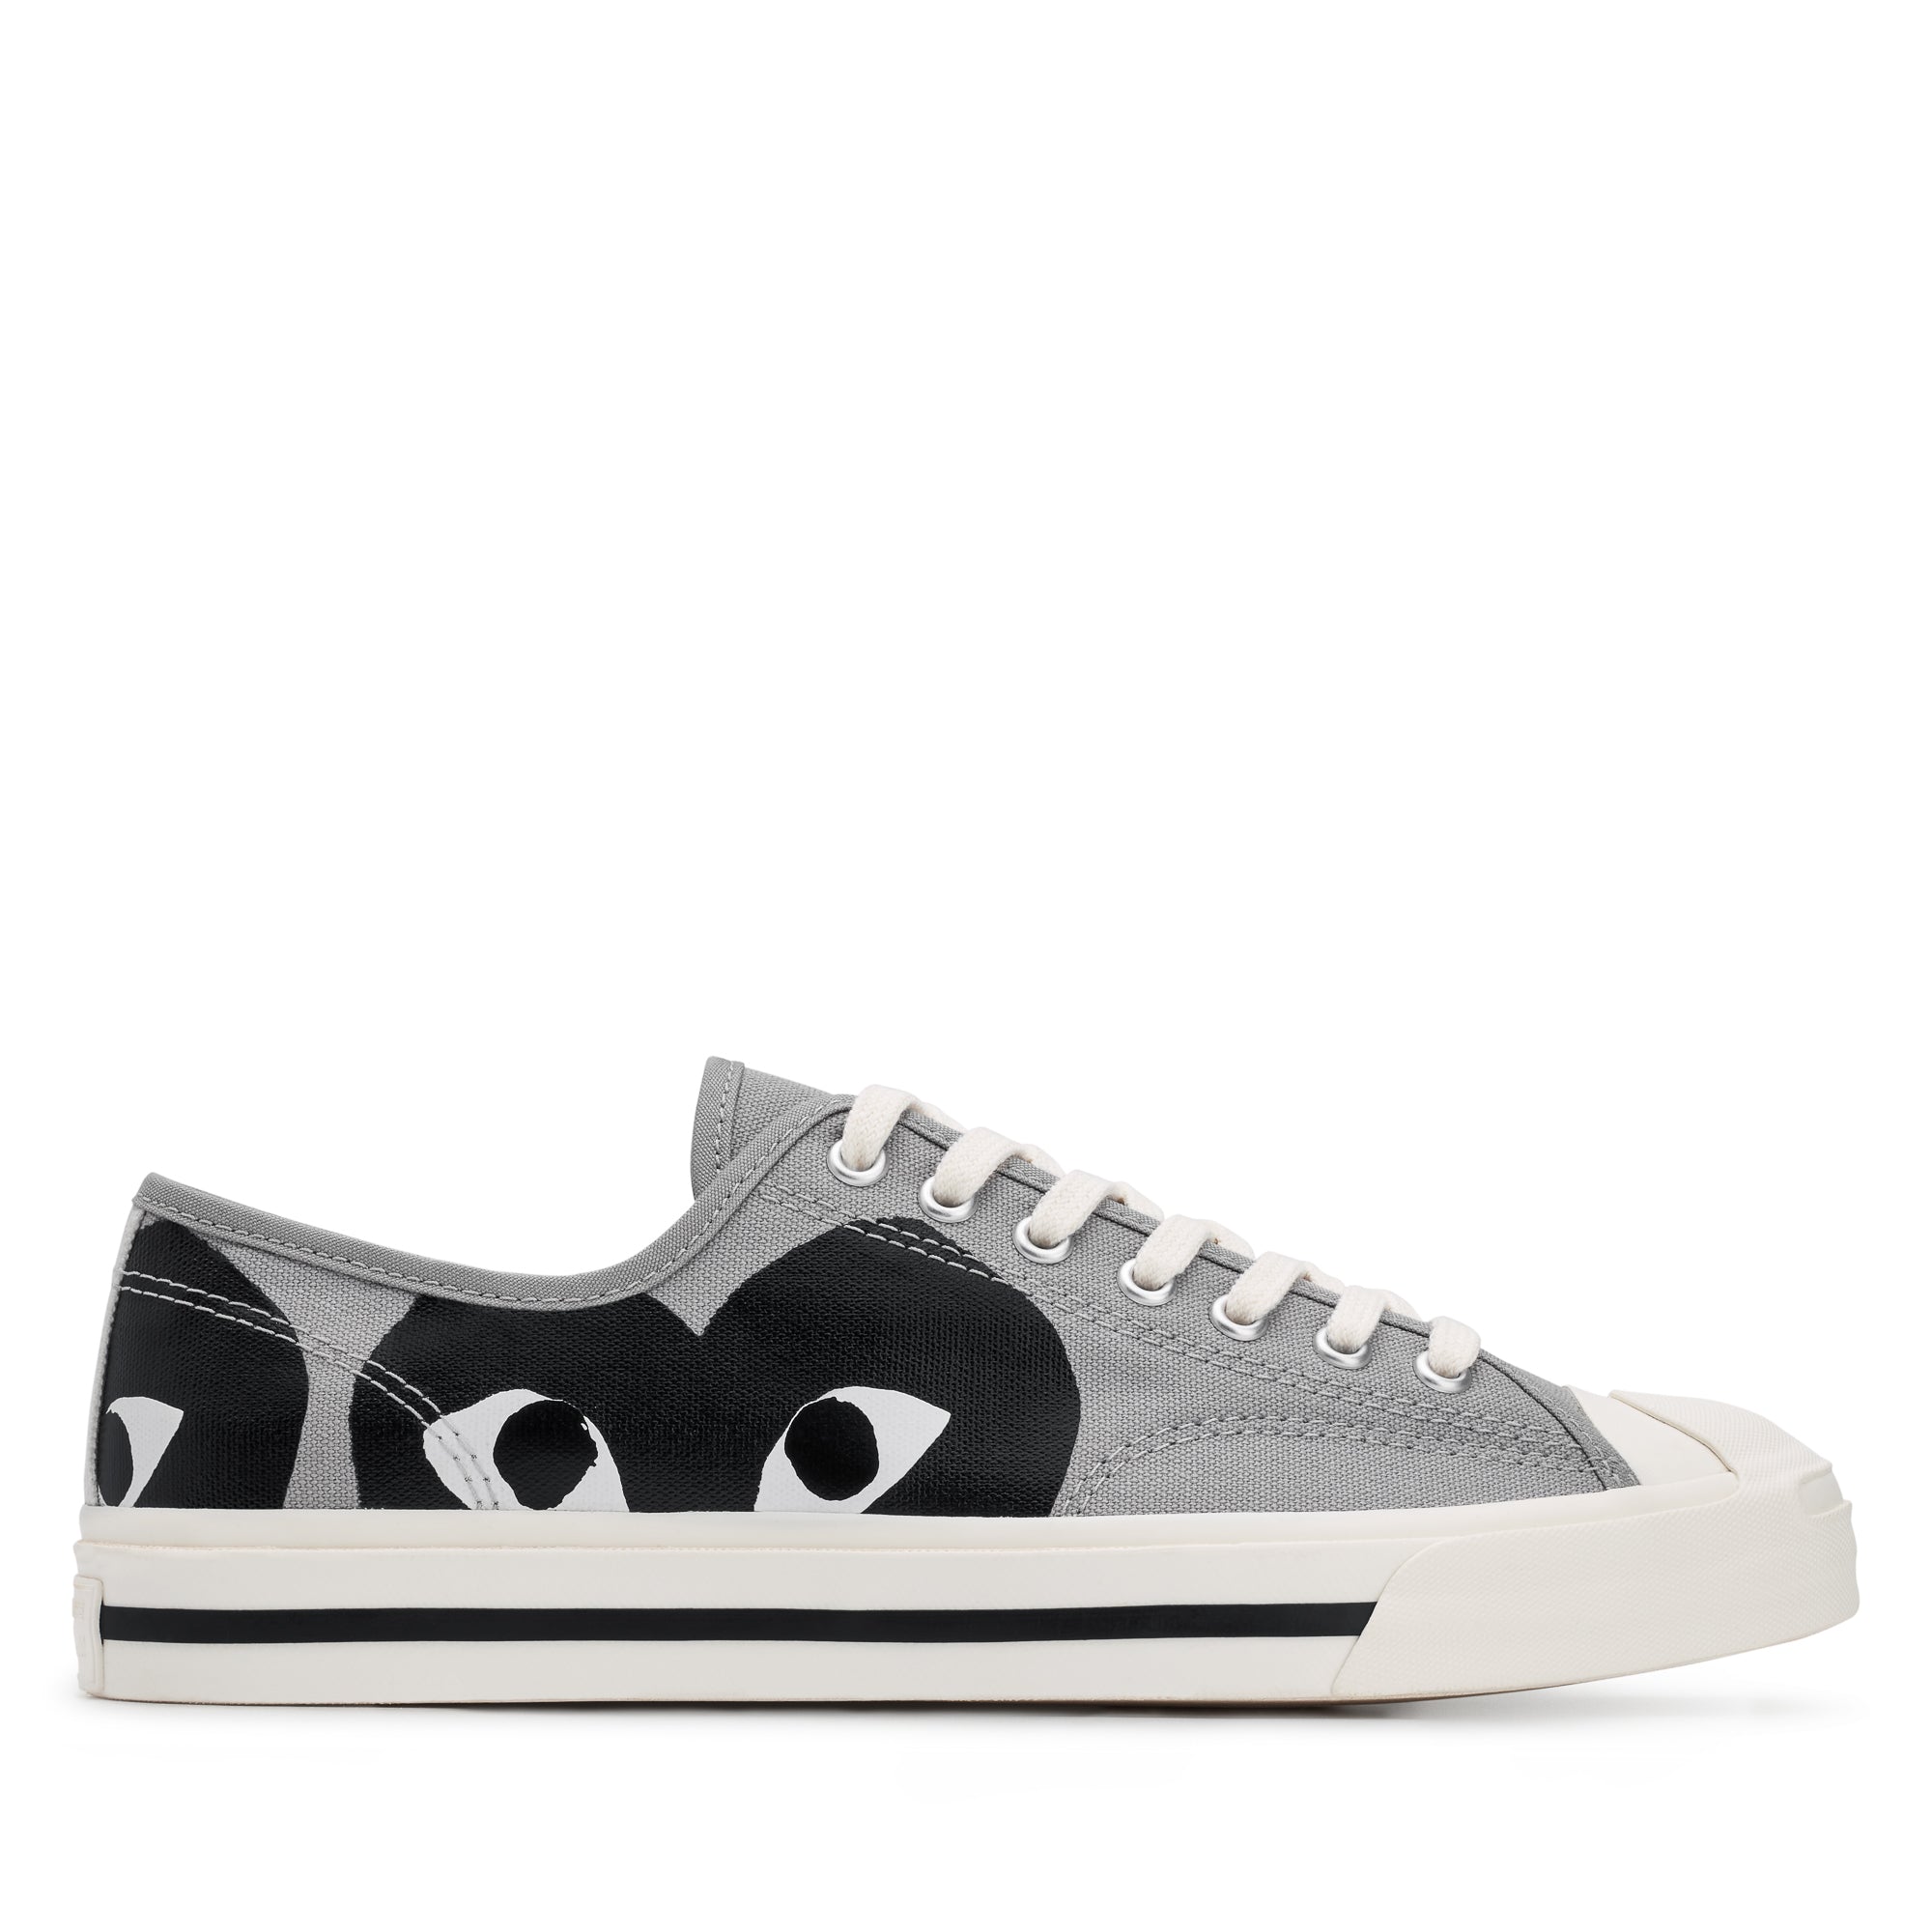 Play Converse - Low Top Black Heart Jack Purcell Sneakers - (Black) view 1